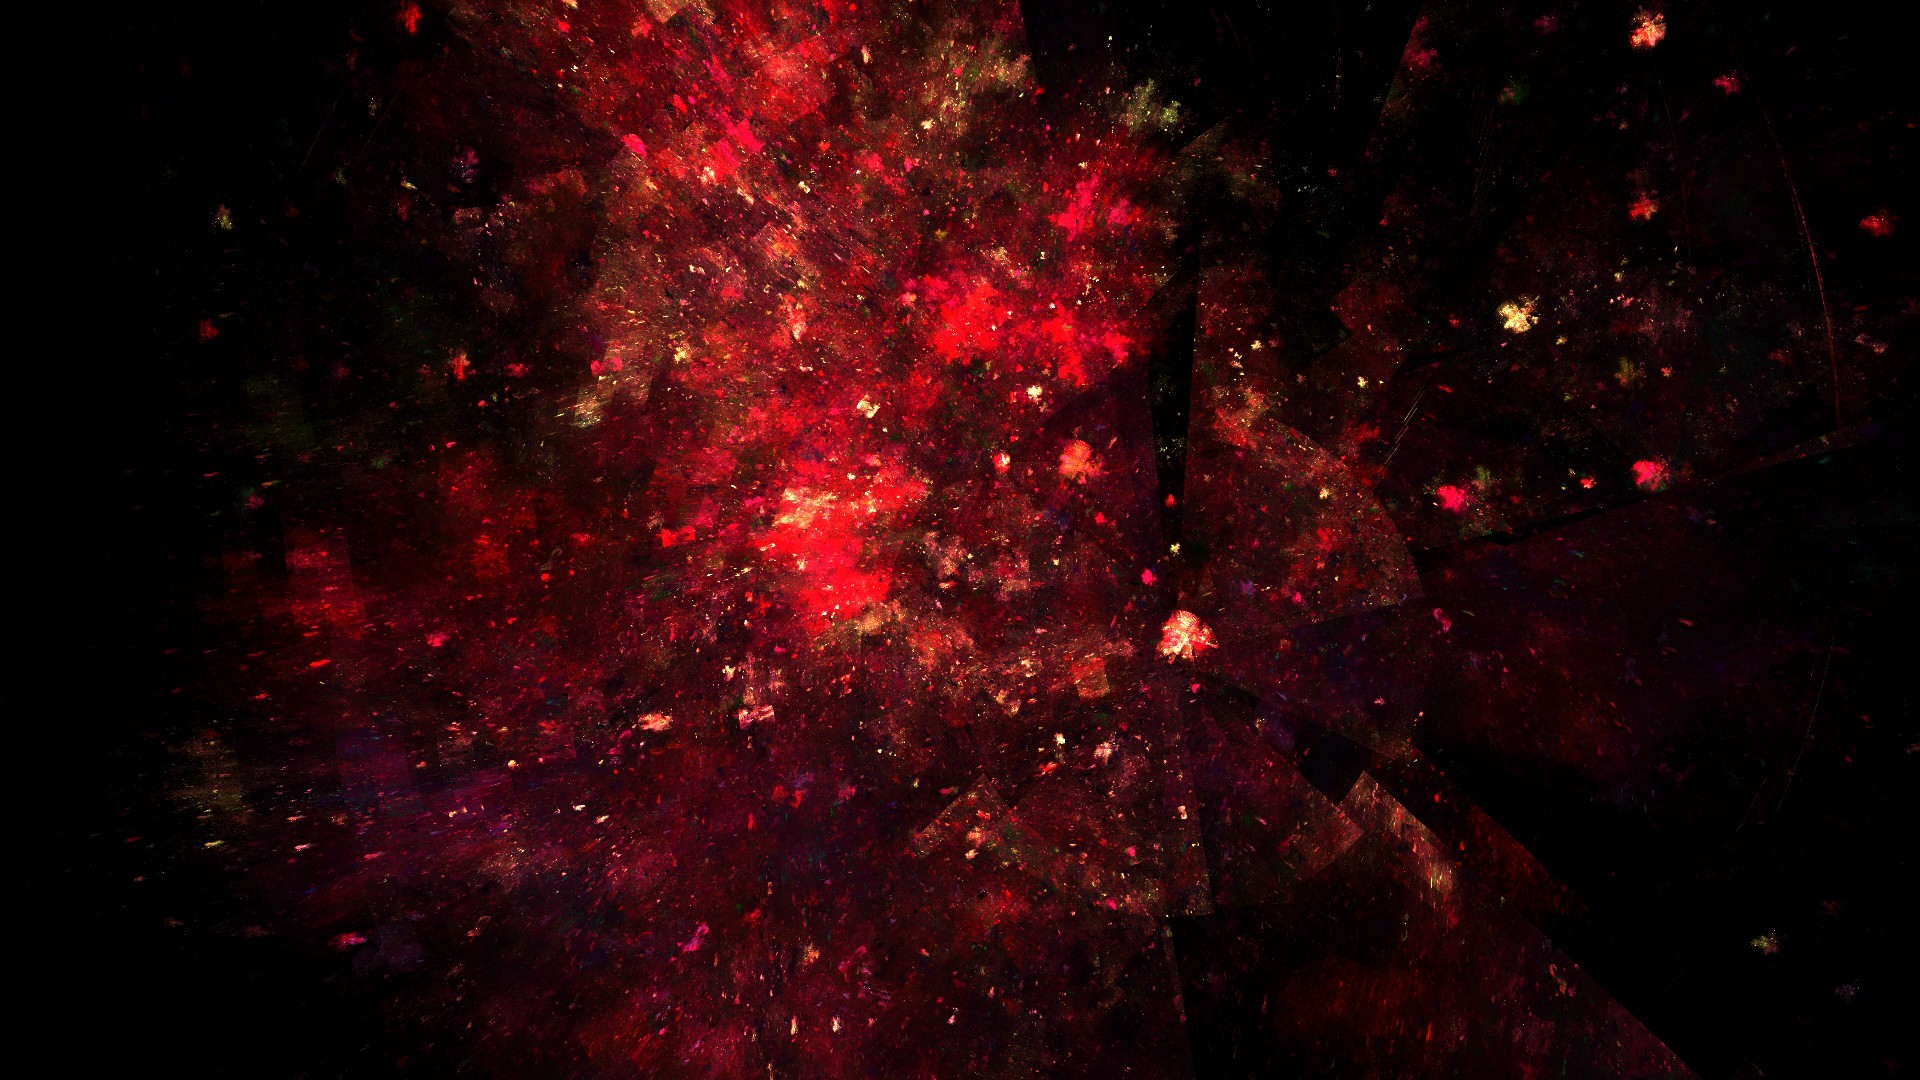 1920x1080 ... Abstract Red wallpapers (Desktop, Phone, Tablet) - Awesome Desktop .